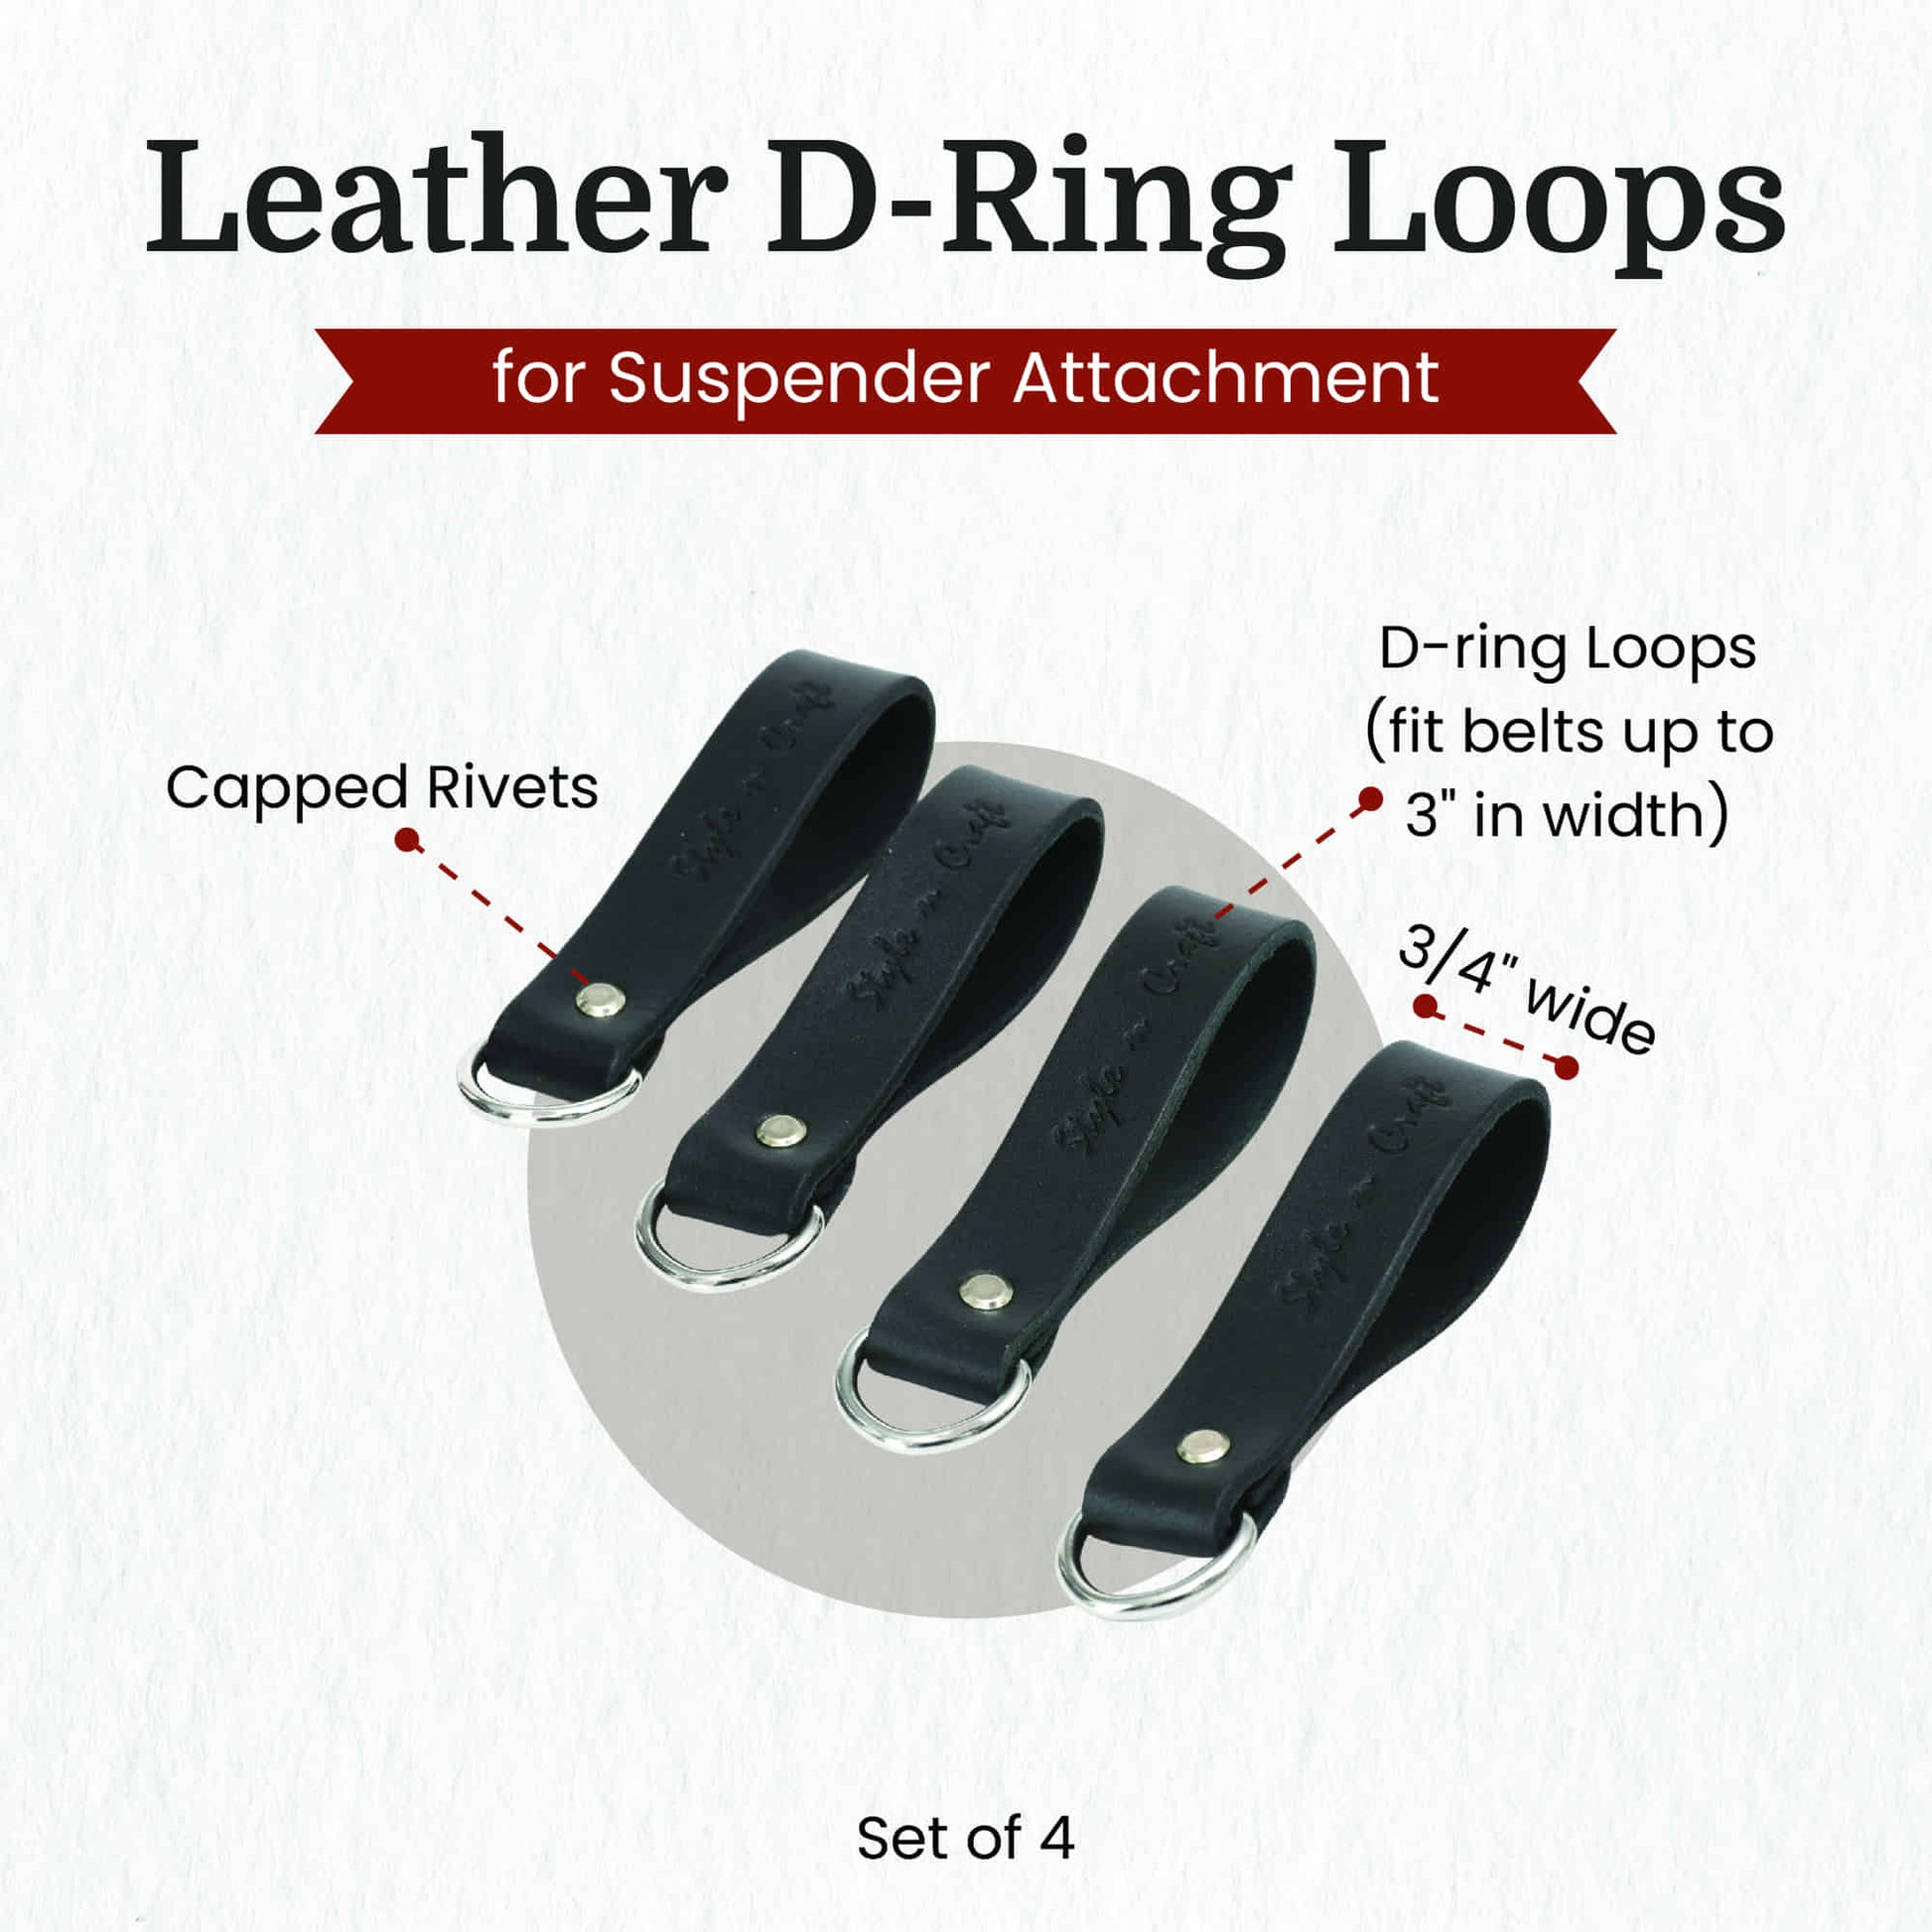 Style n Craft 75202 - Leather D-Ring Loop Set (4 Pcs) for Suspender Attachment in Black Color - Front Angled View. Each Set Contains 4 Leather Loops - Showing the Details